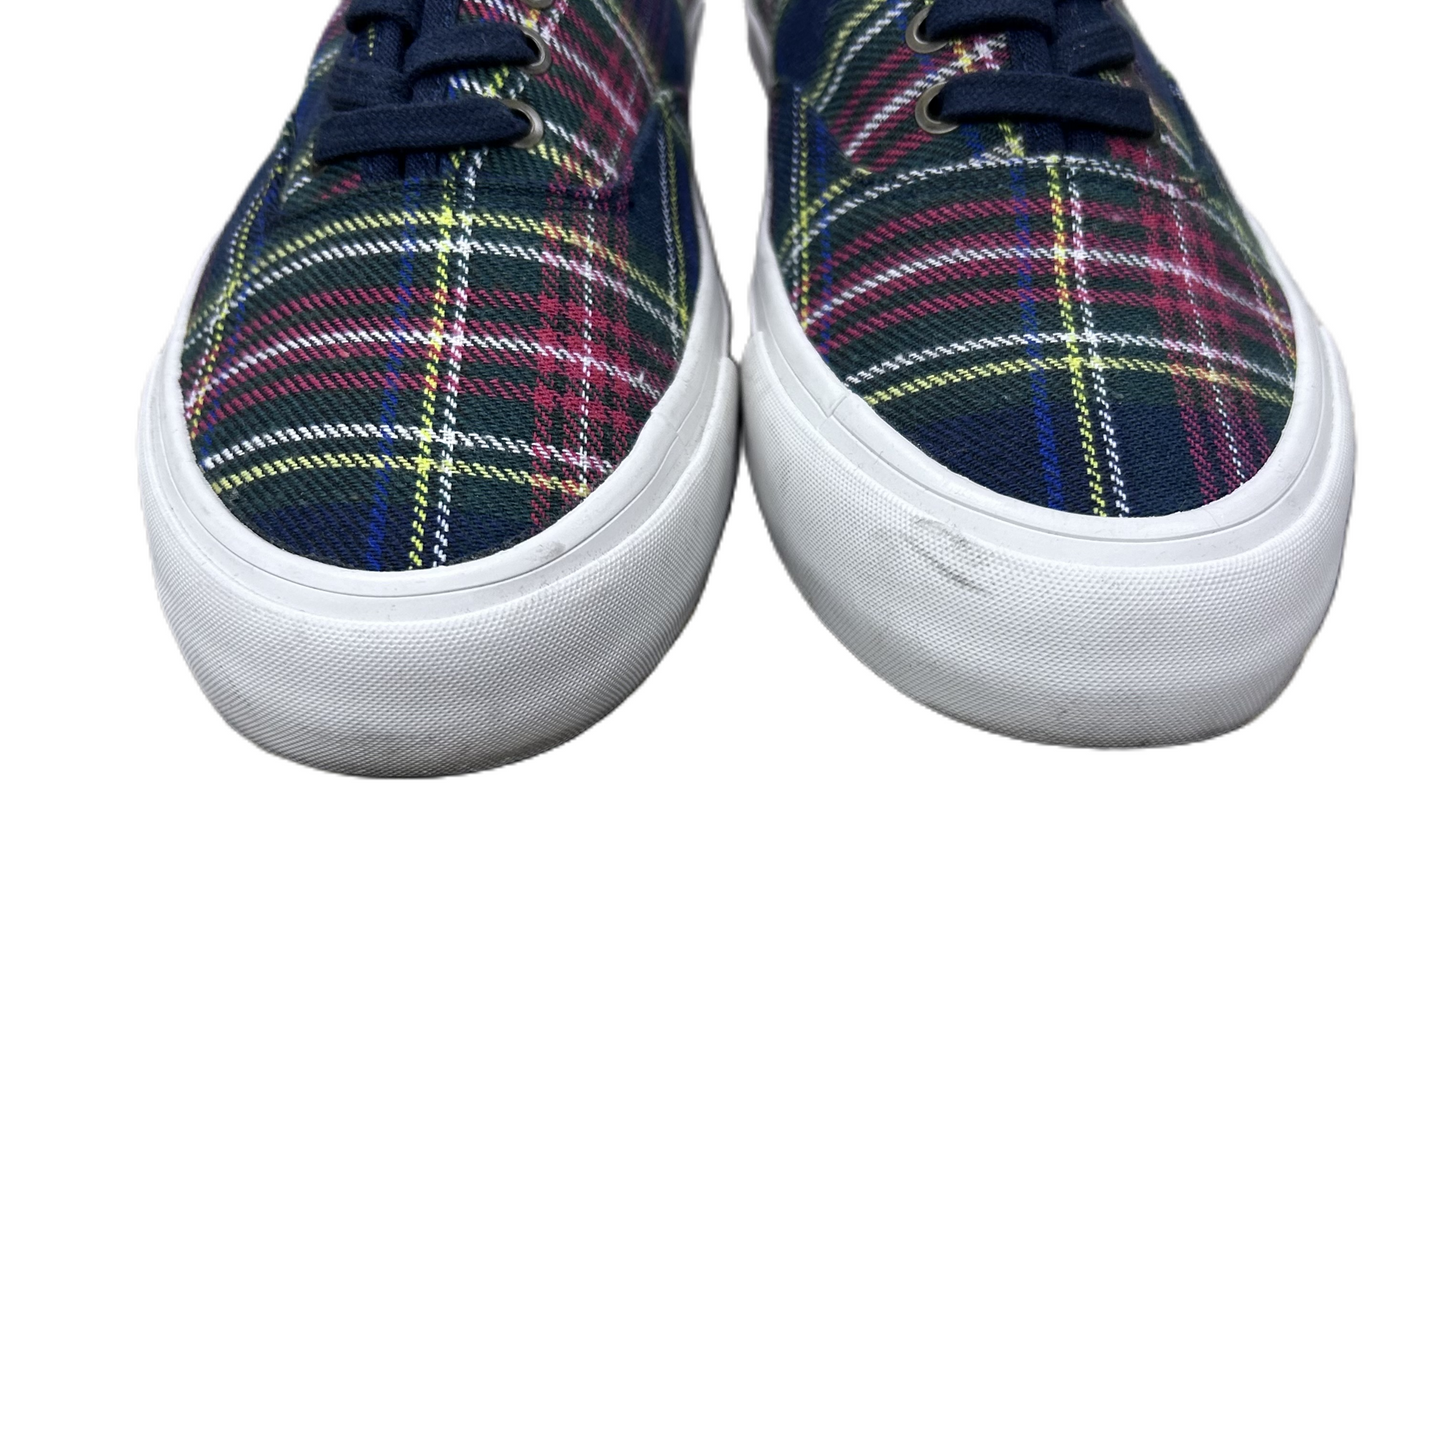 Shoes Sneakers By J Crew  Size: 8.5